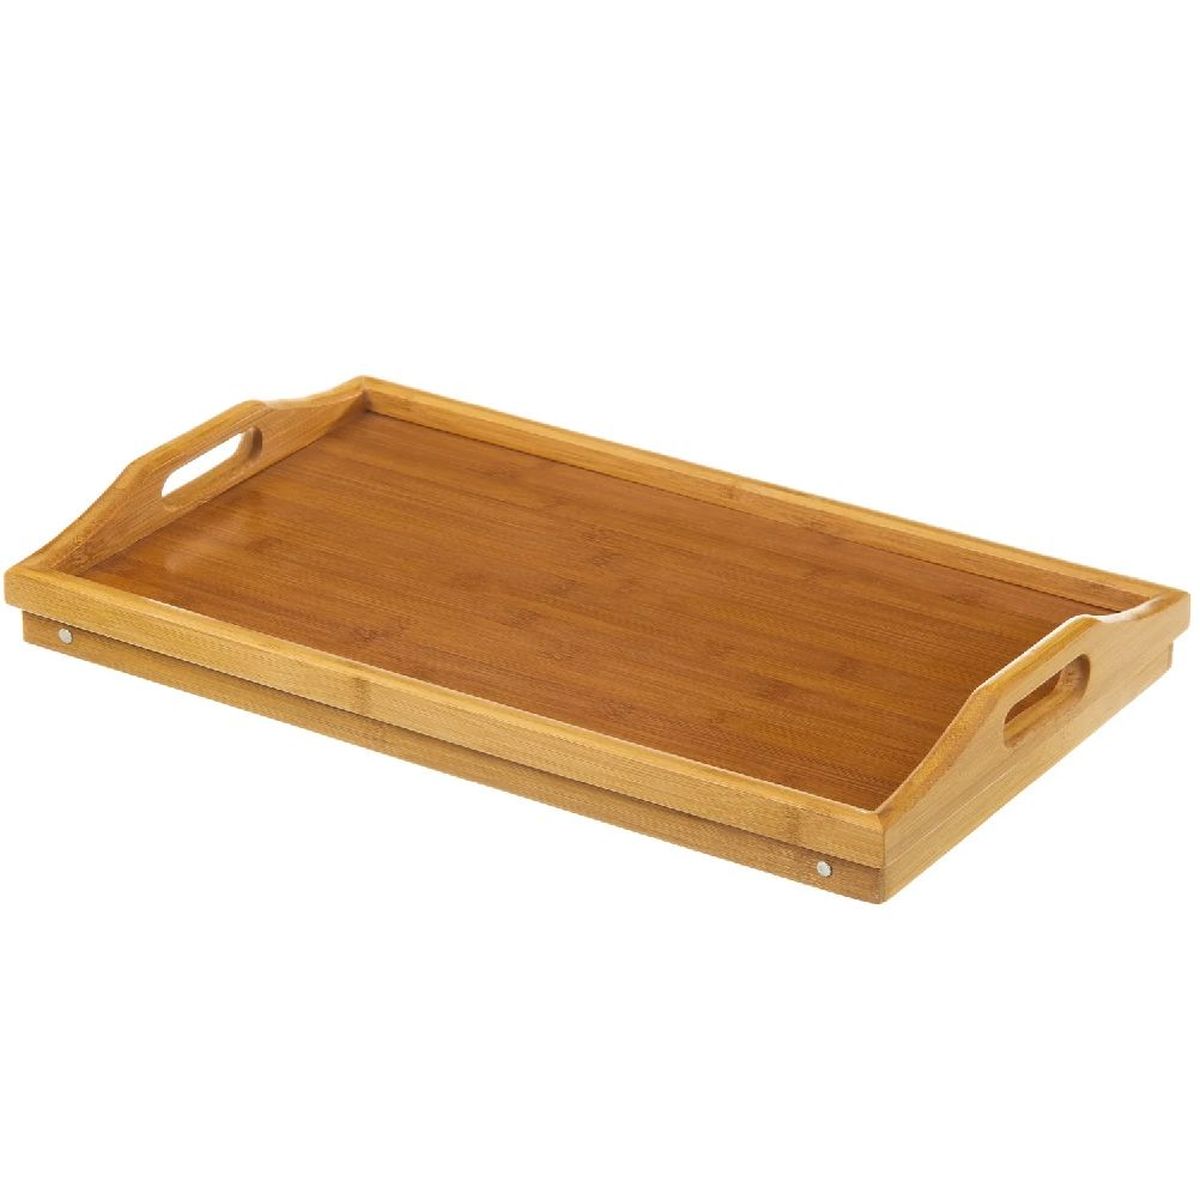 Foldable wooden bed tray